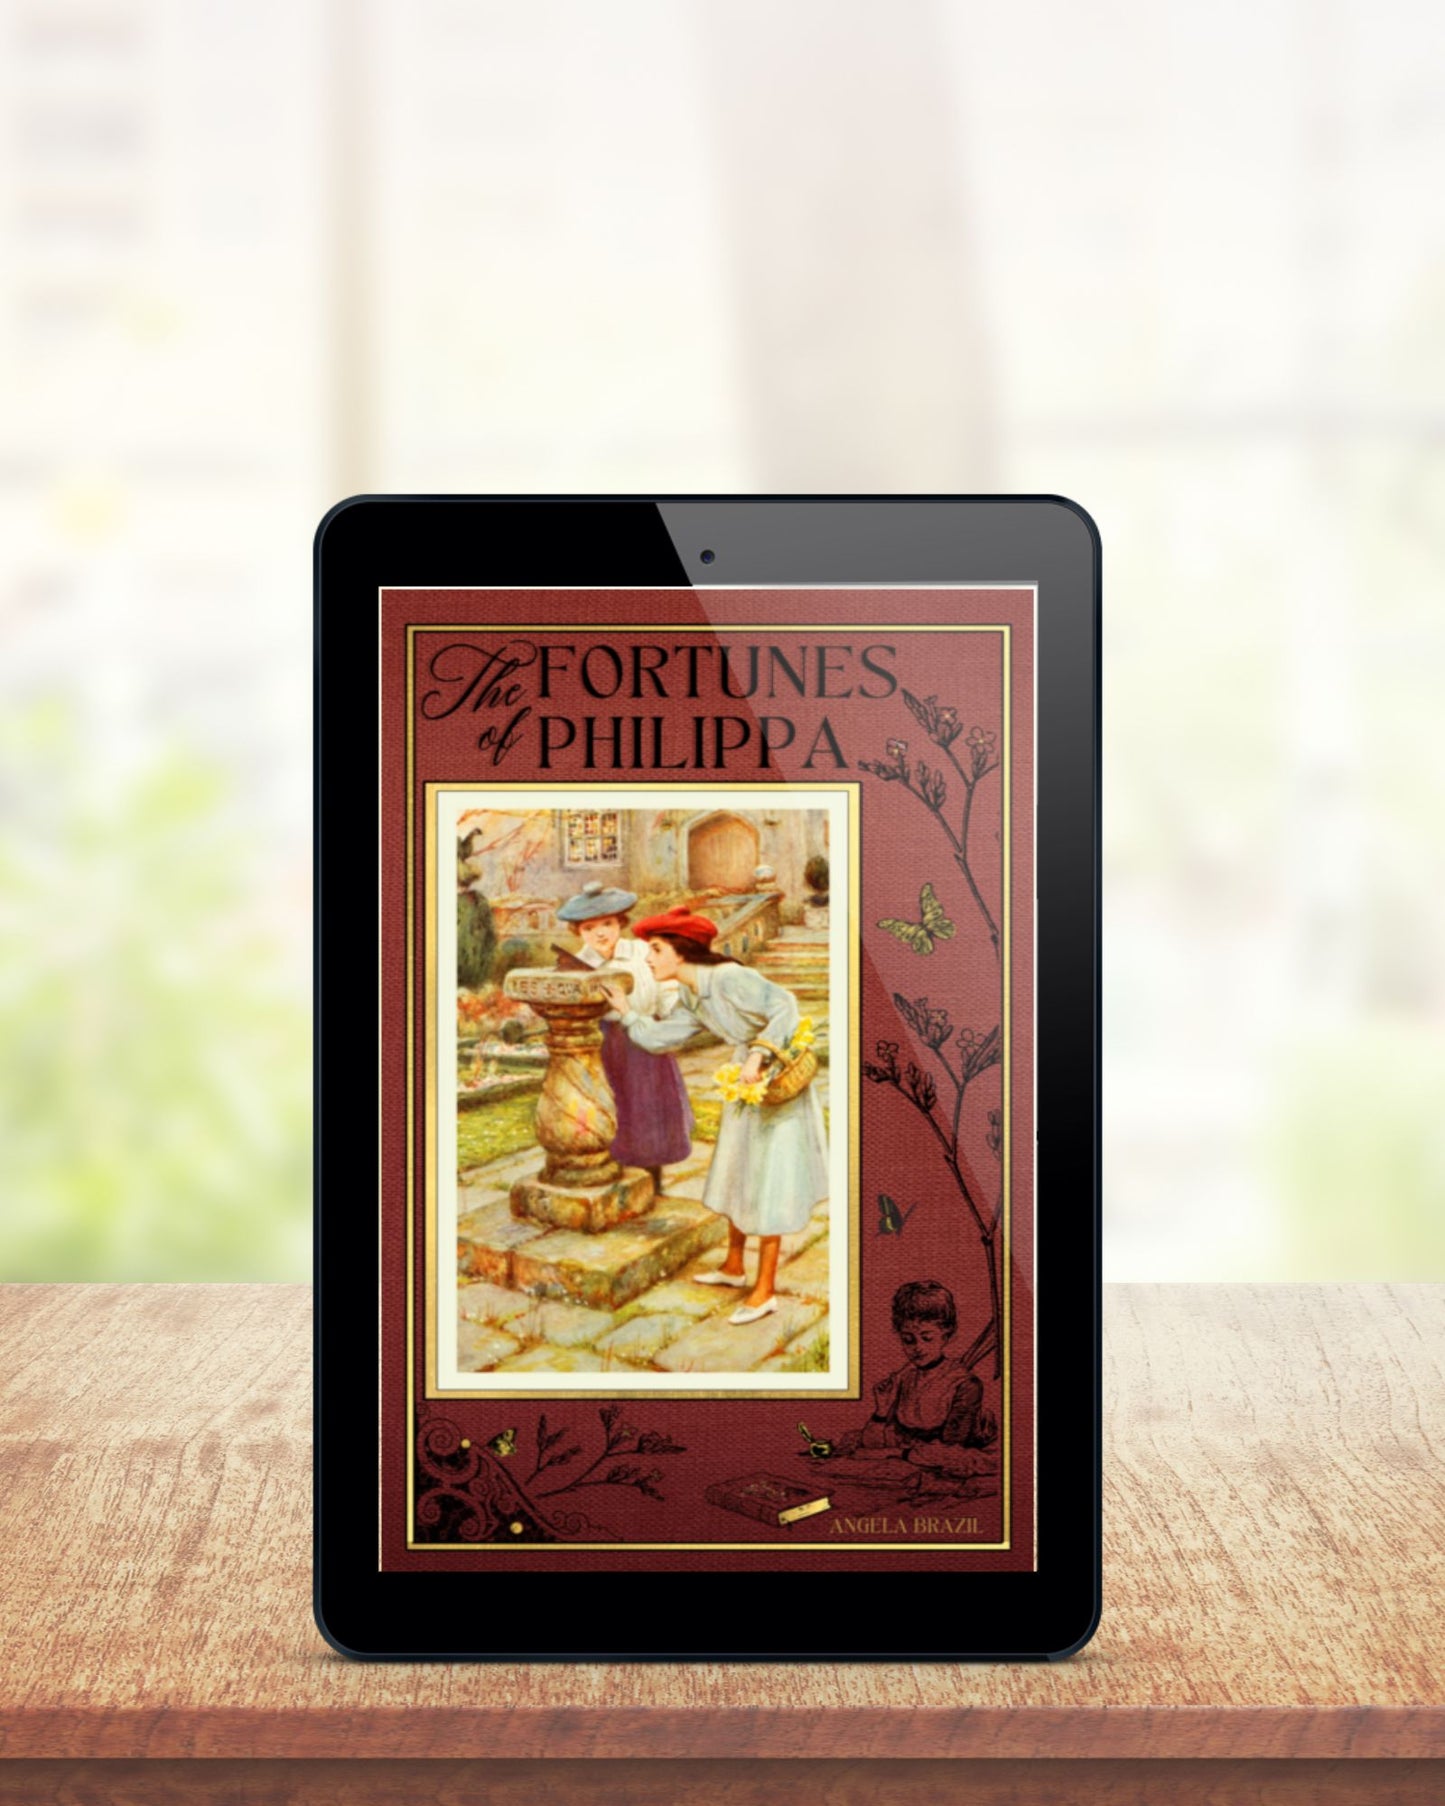 Black tablet stands upright on brown table before blurred pale background. The ebook displayed on the screen is the russet colored cover of "The Fortunes of Philippa".